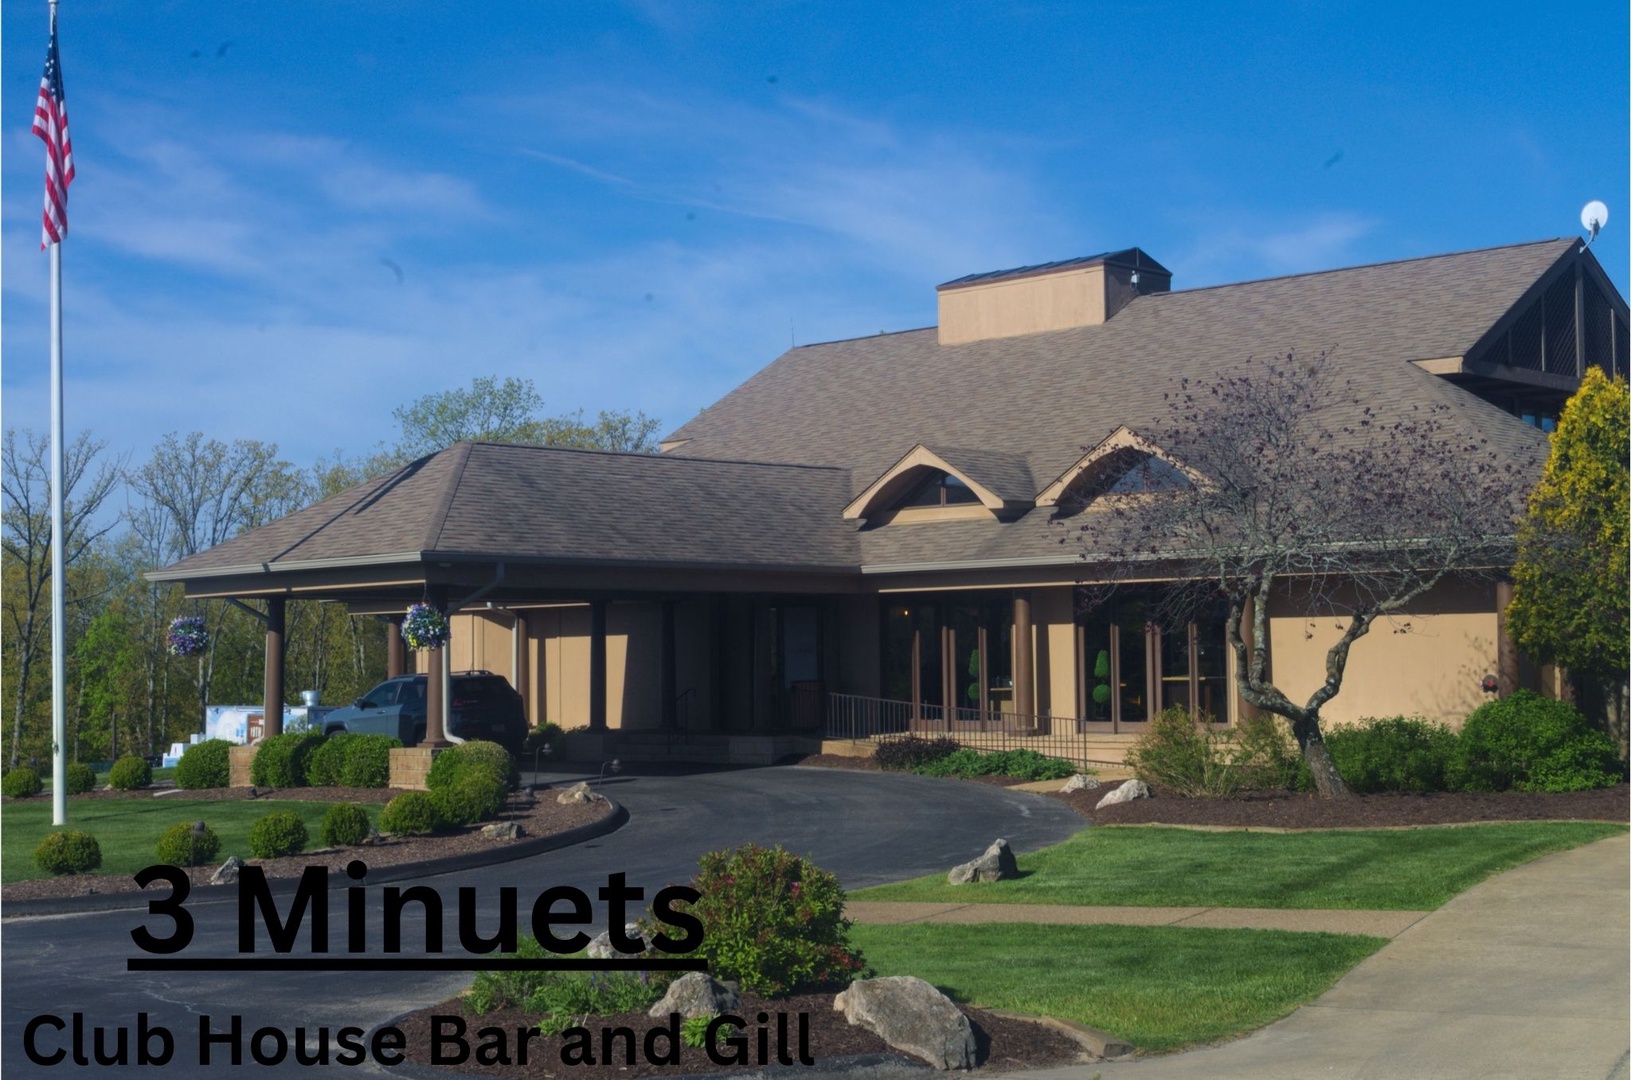 The beautiful clubhouse is a great place to get some dinner or start a round of golf.